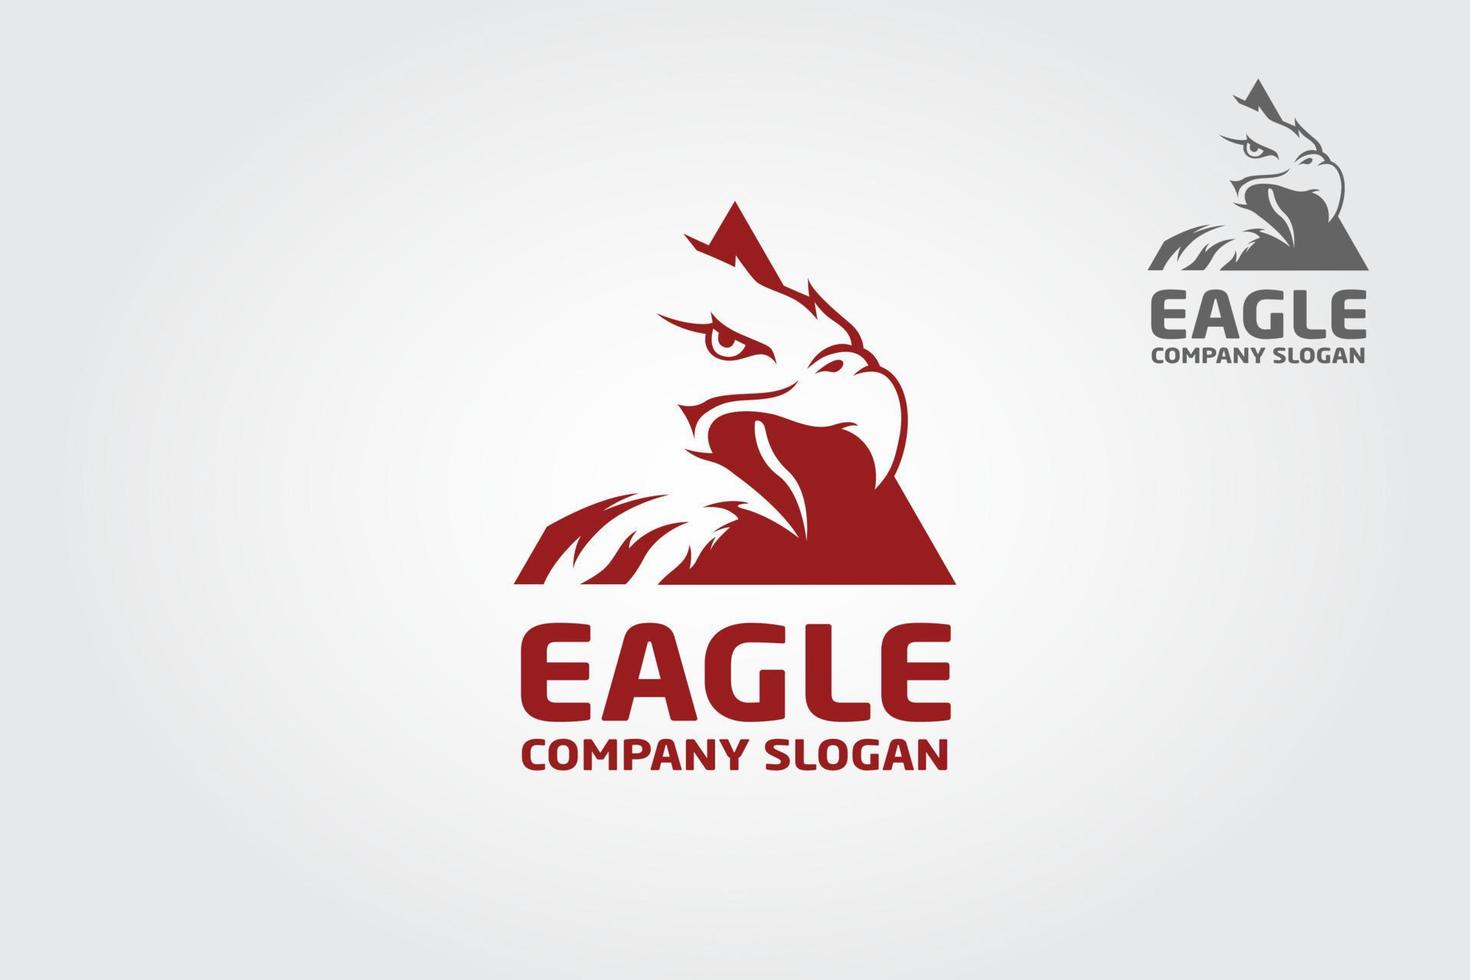 Eagle Vector Logo Template. This logo design suitable for business, hawk, flacon, eagle, bird, flying, wing, symbol, design, airline, etc